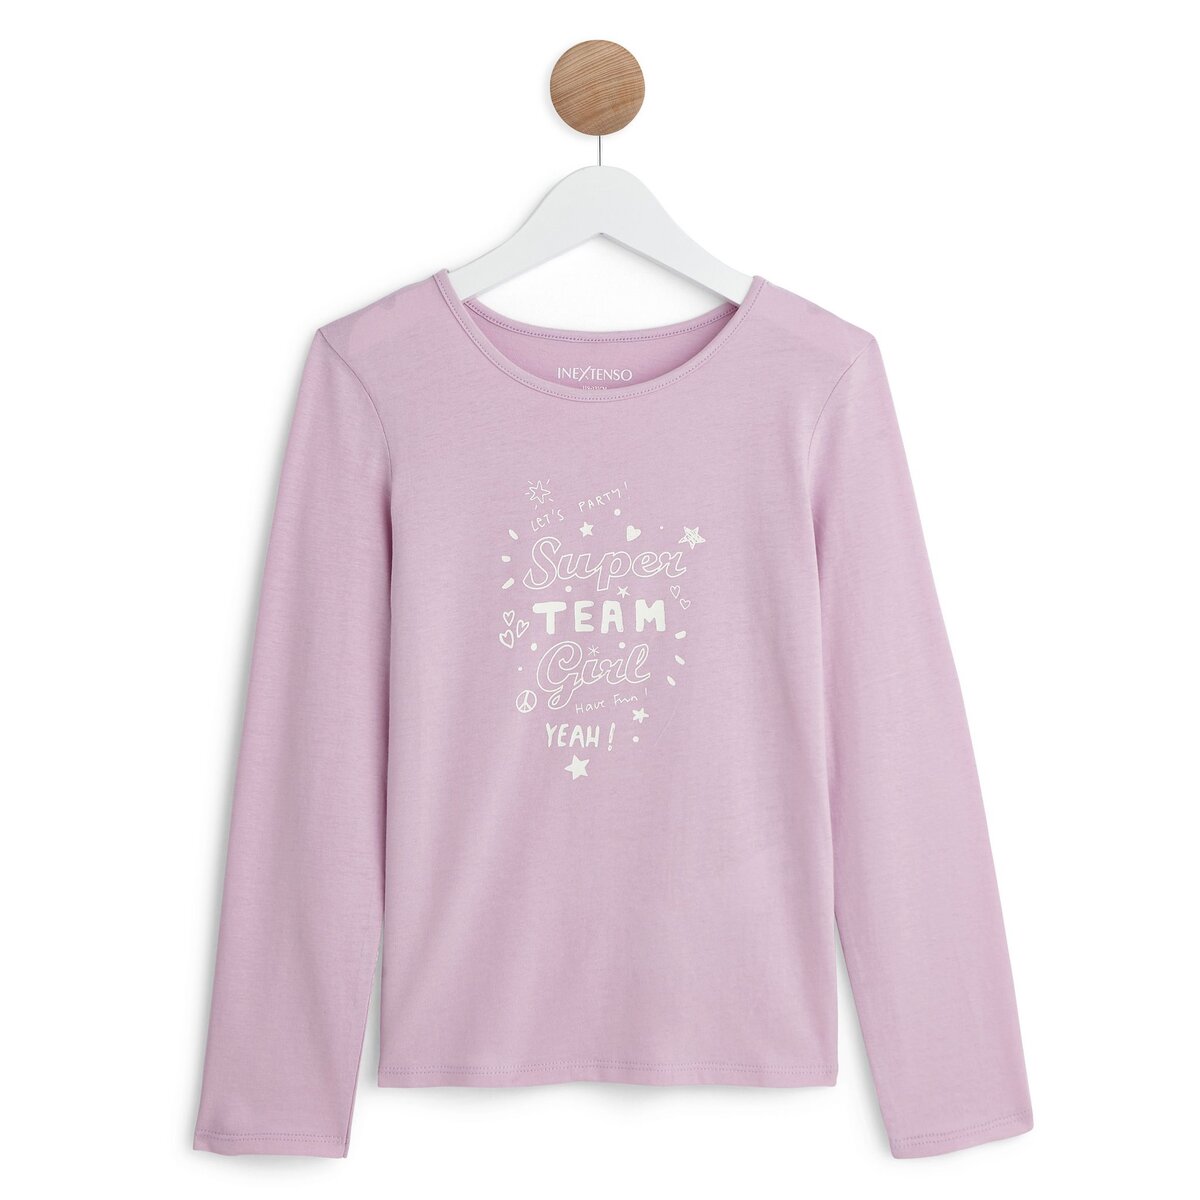 IN EXTENSO T-shirt manches longues super team girl fille